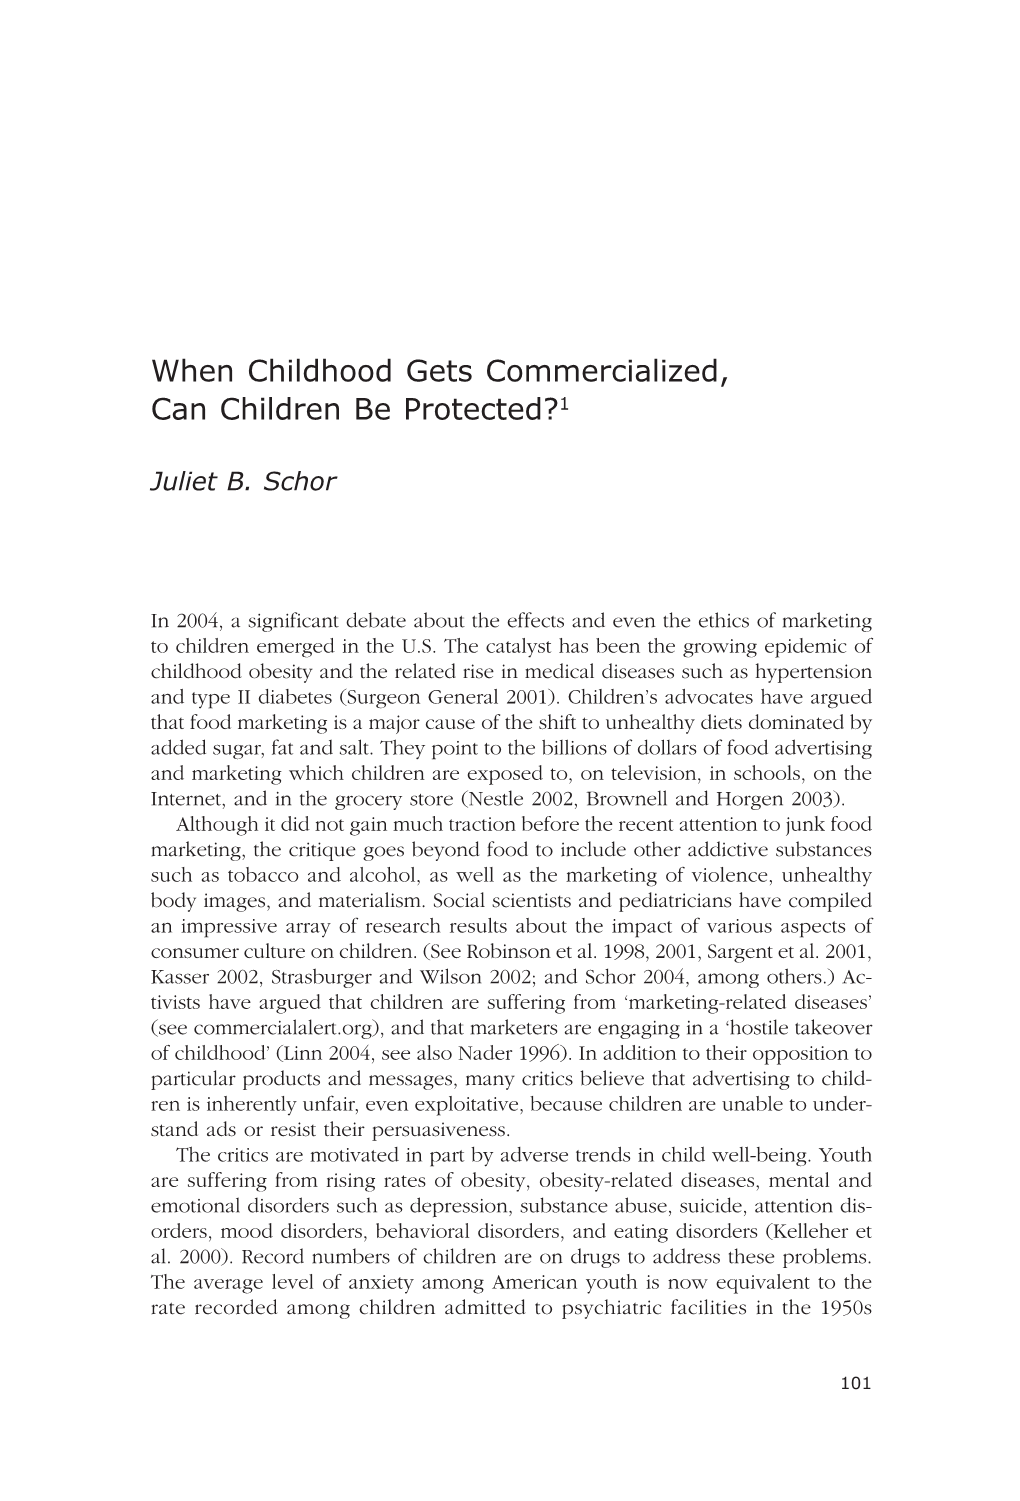 When Childhood Gets Commercialized, Can Children Be Protected?1